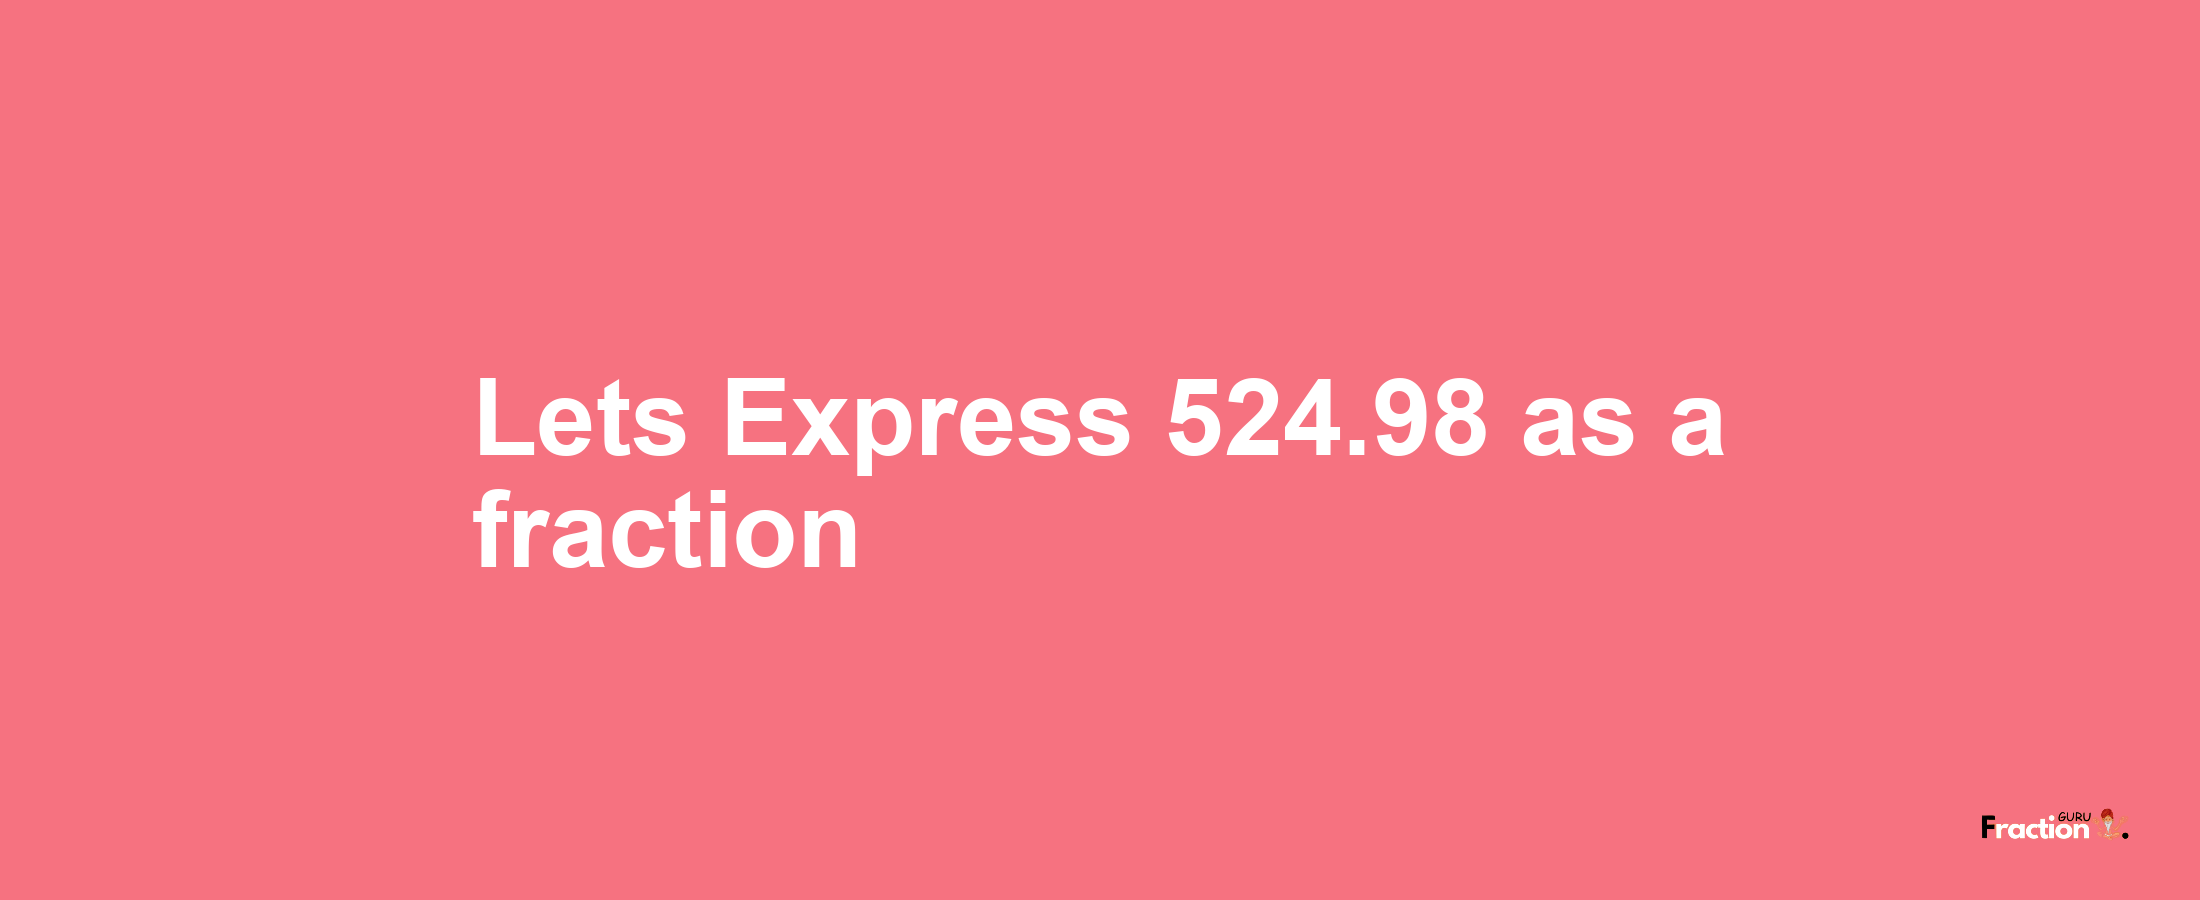 Lets Express 524.98 as afraction